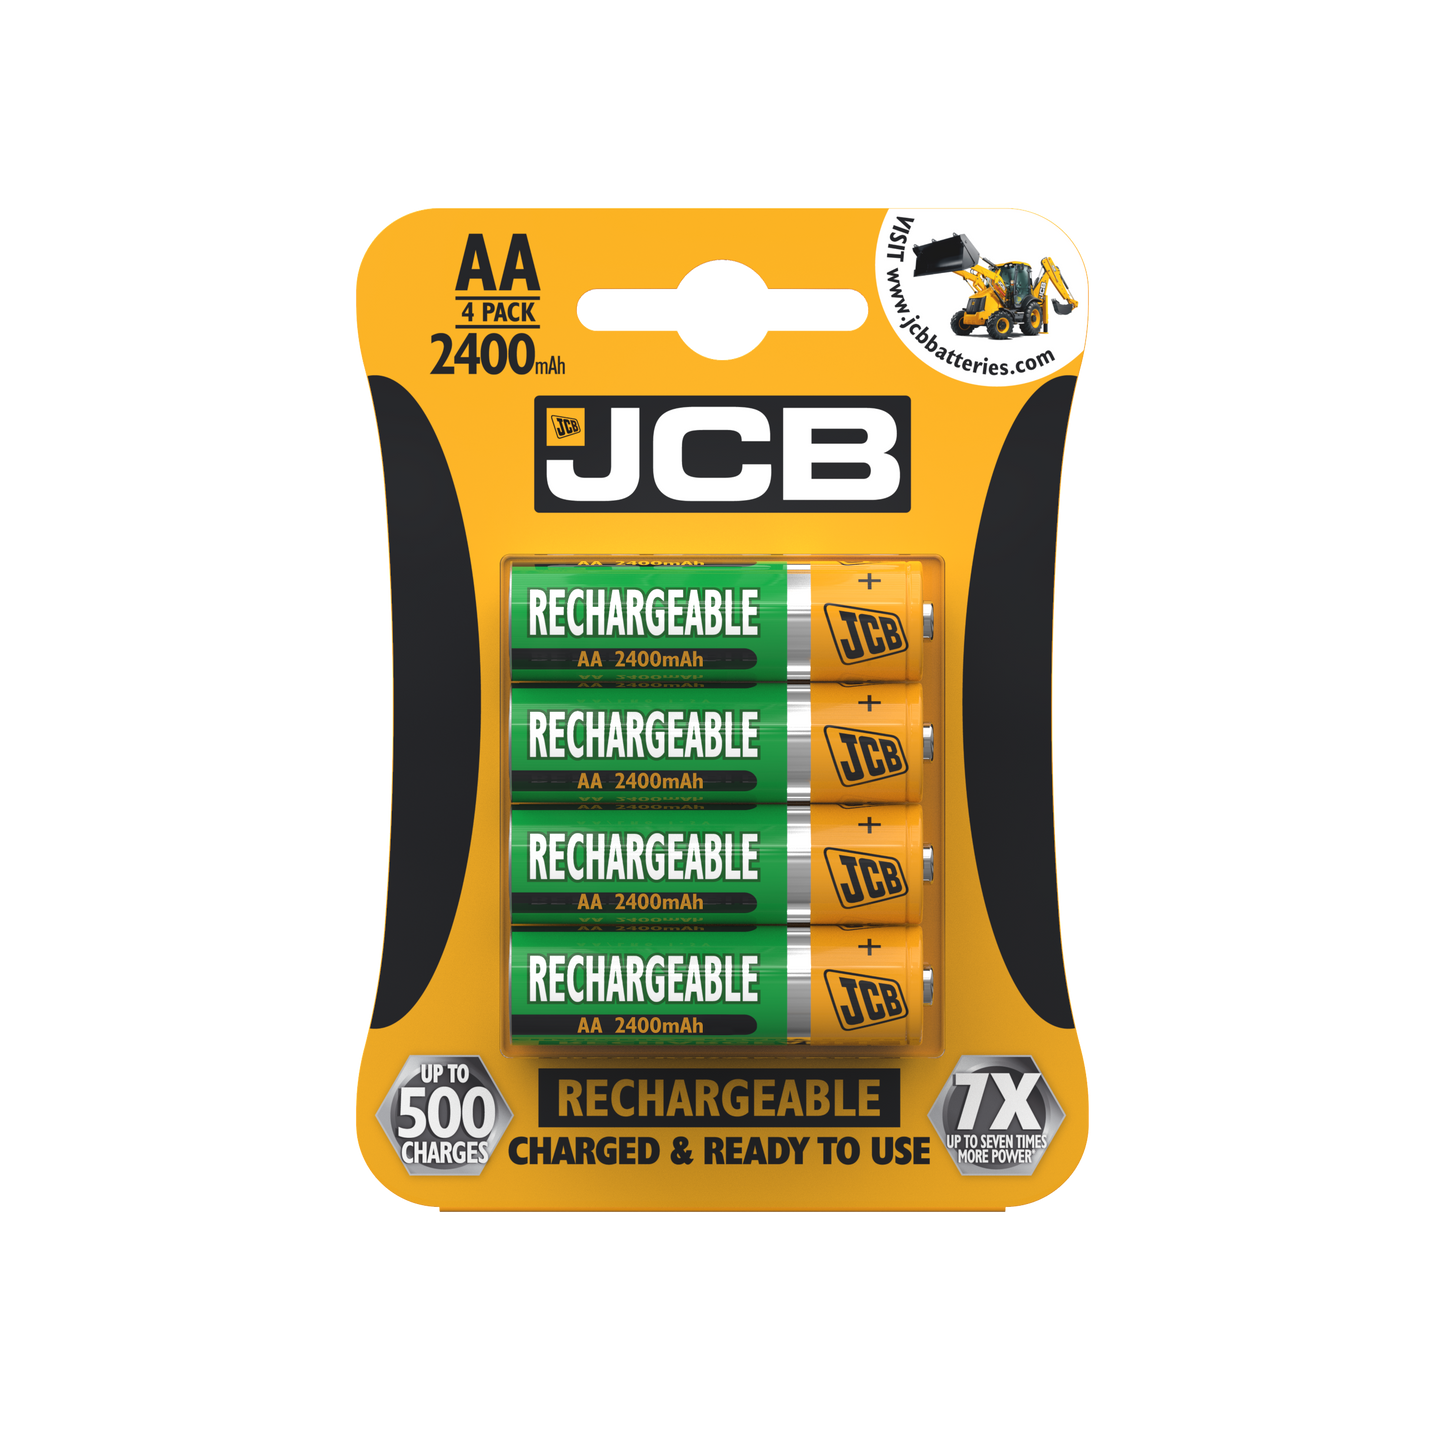 JCB AA 2400mAh Rechargeable, Pack of 4